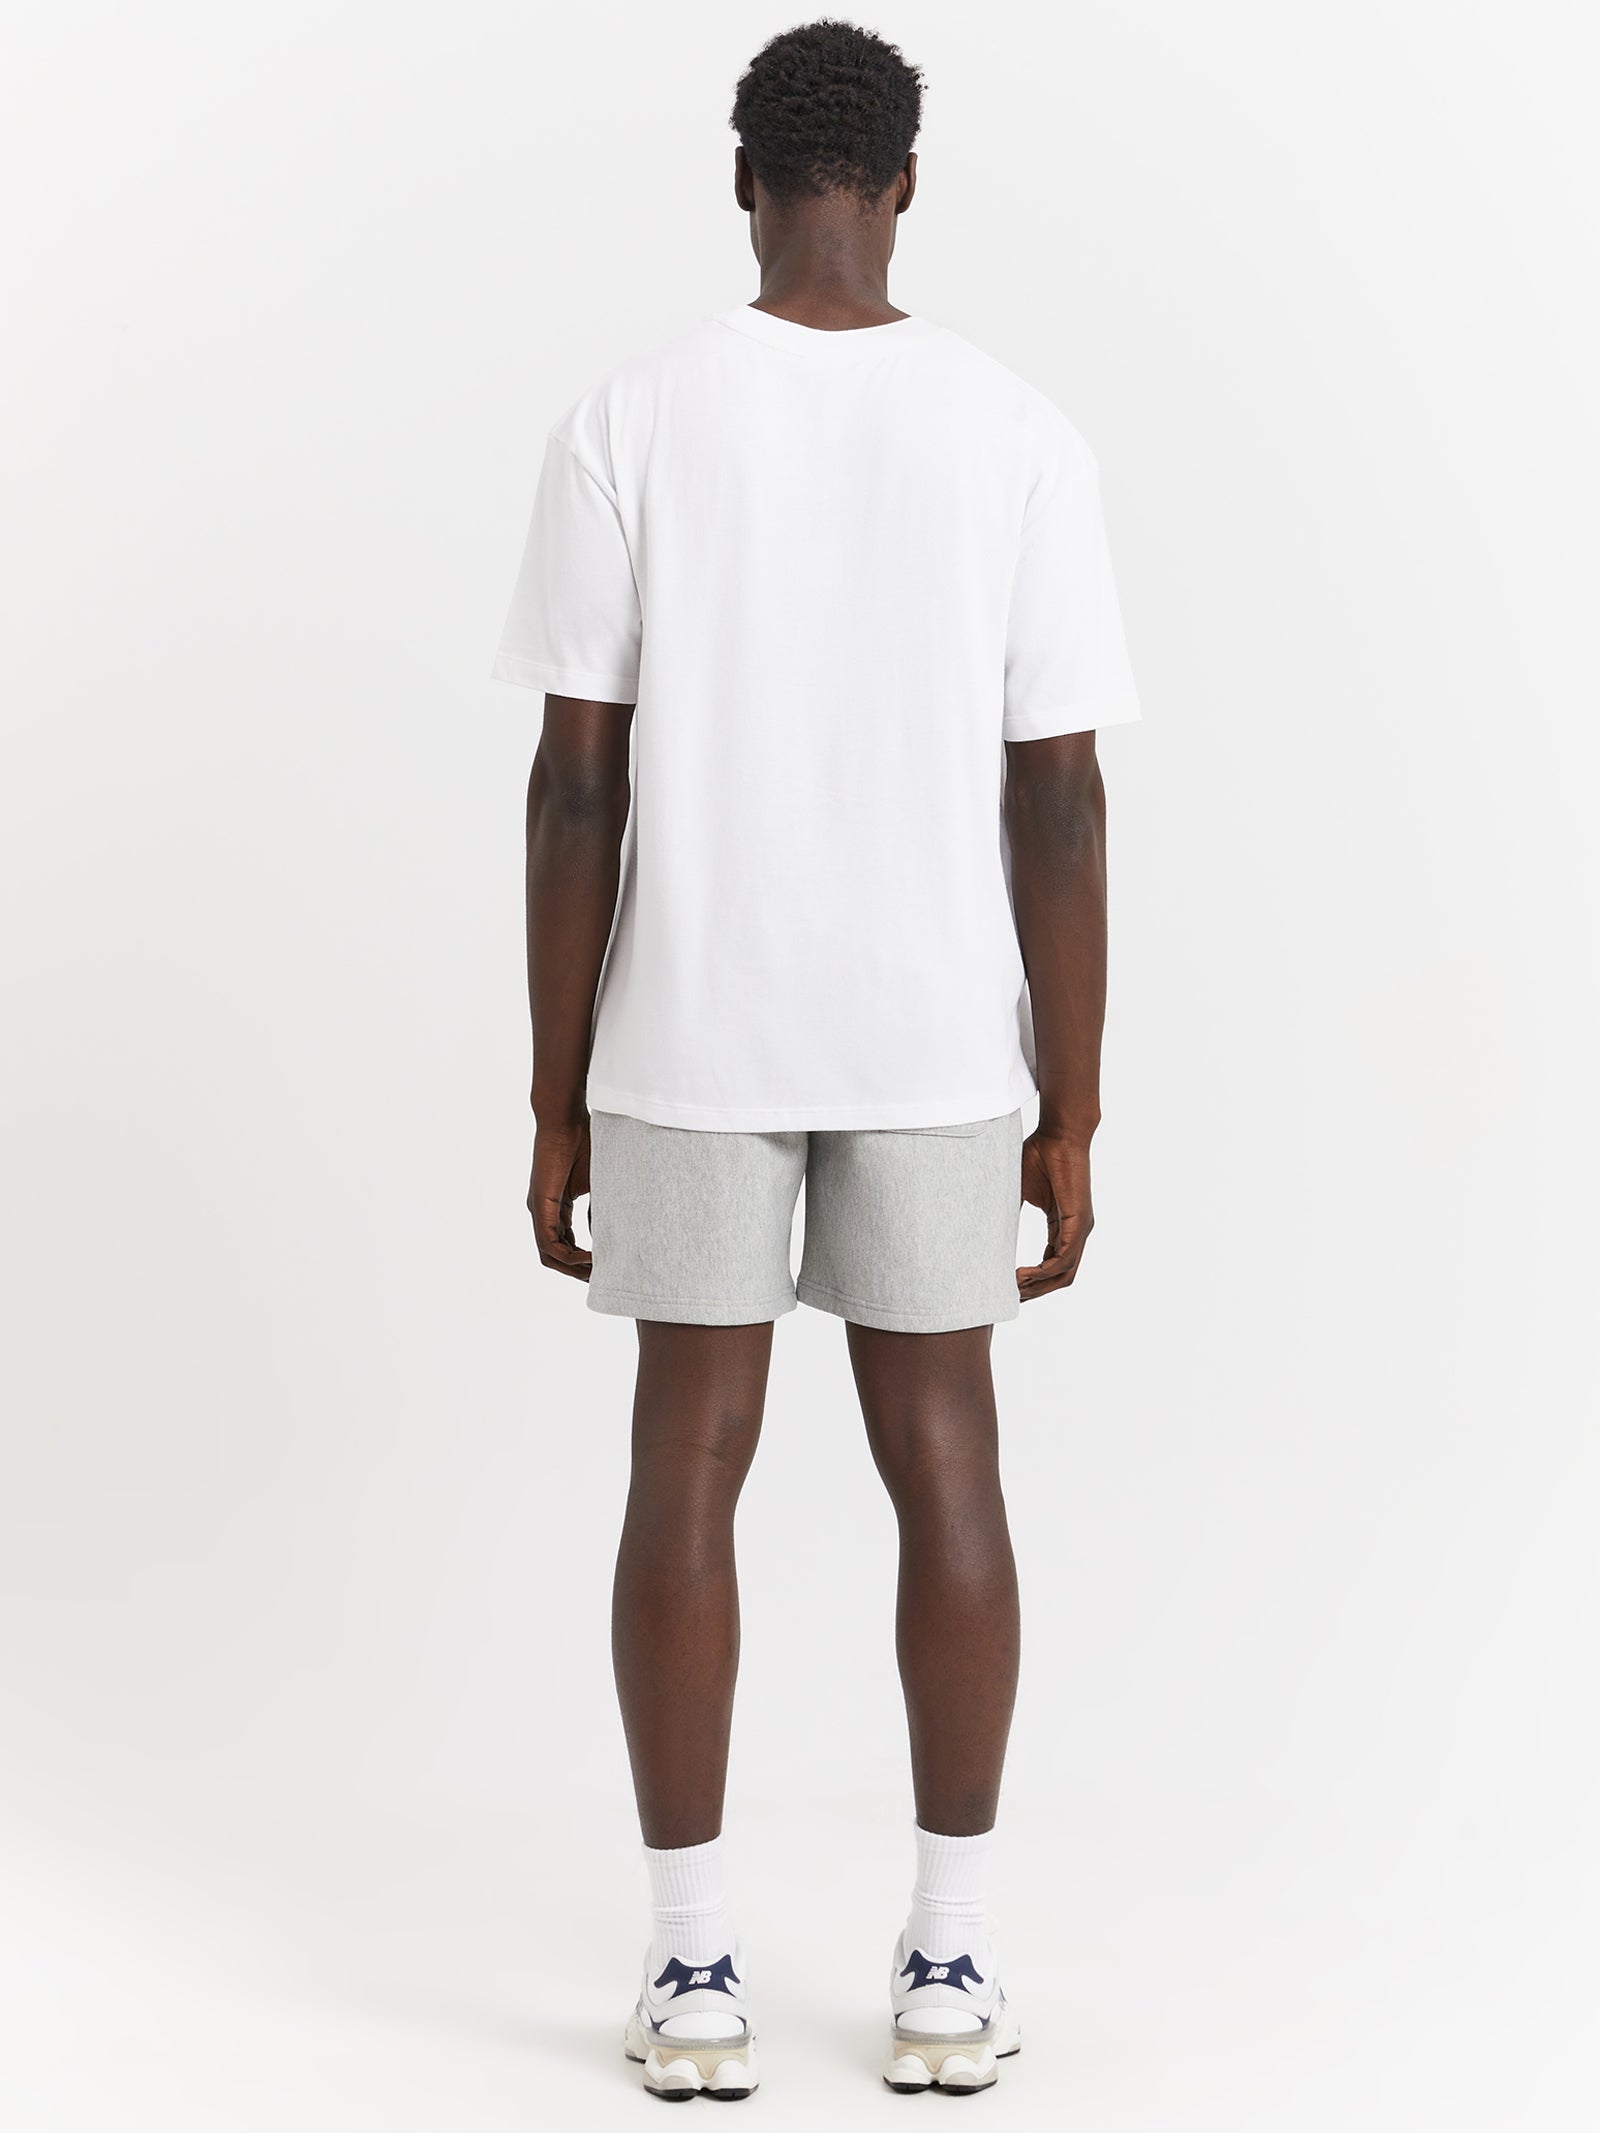 Reverse Weave Terry Shorts in Oxford Heather Grey